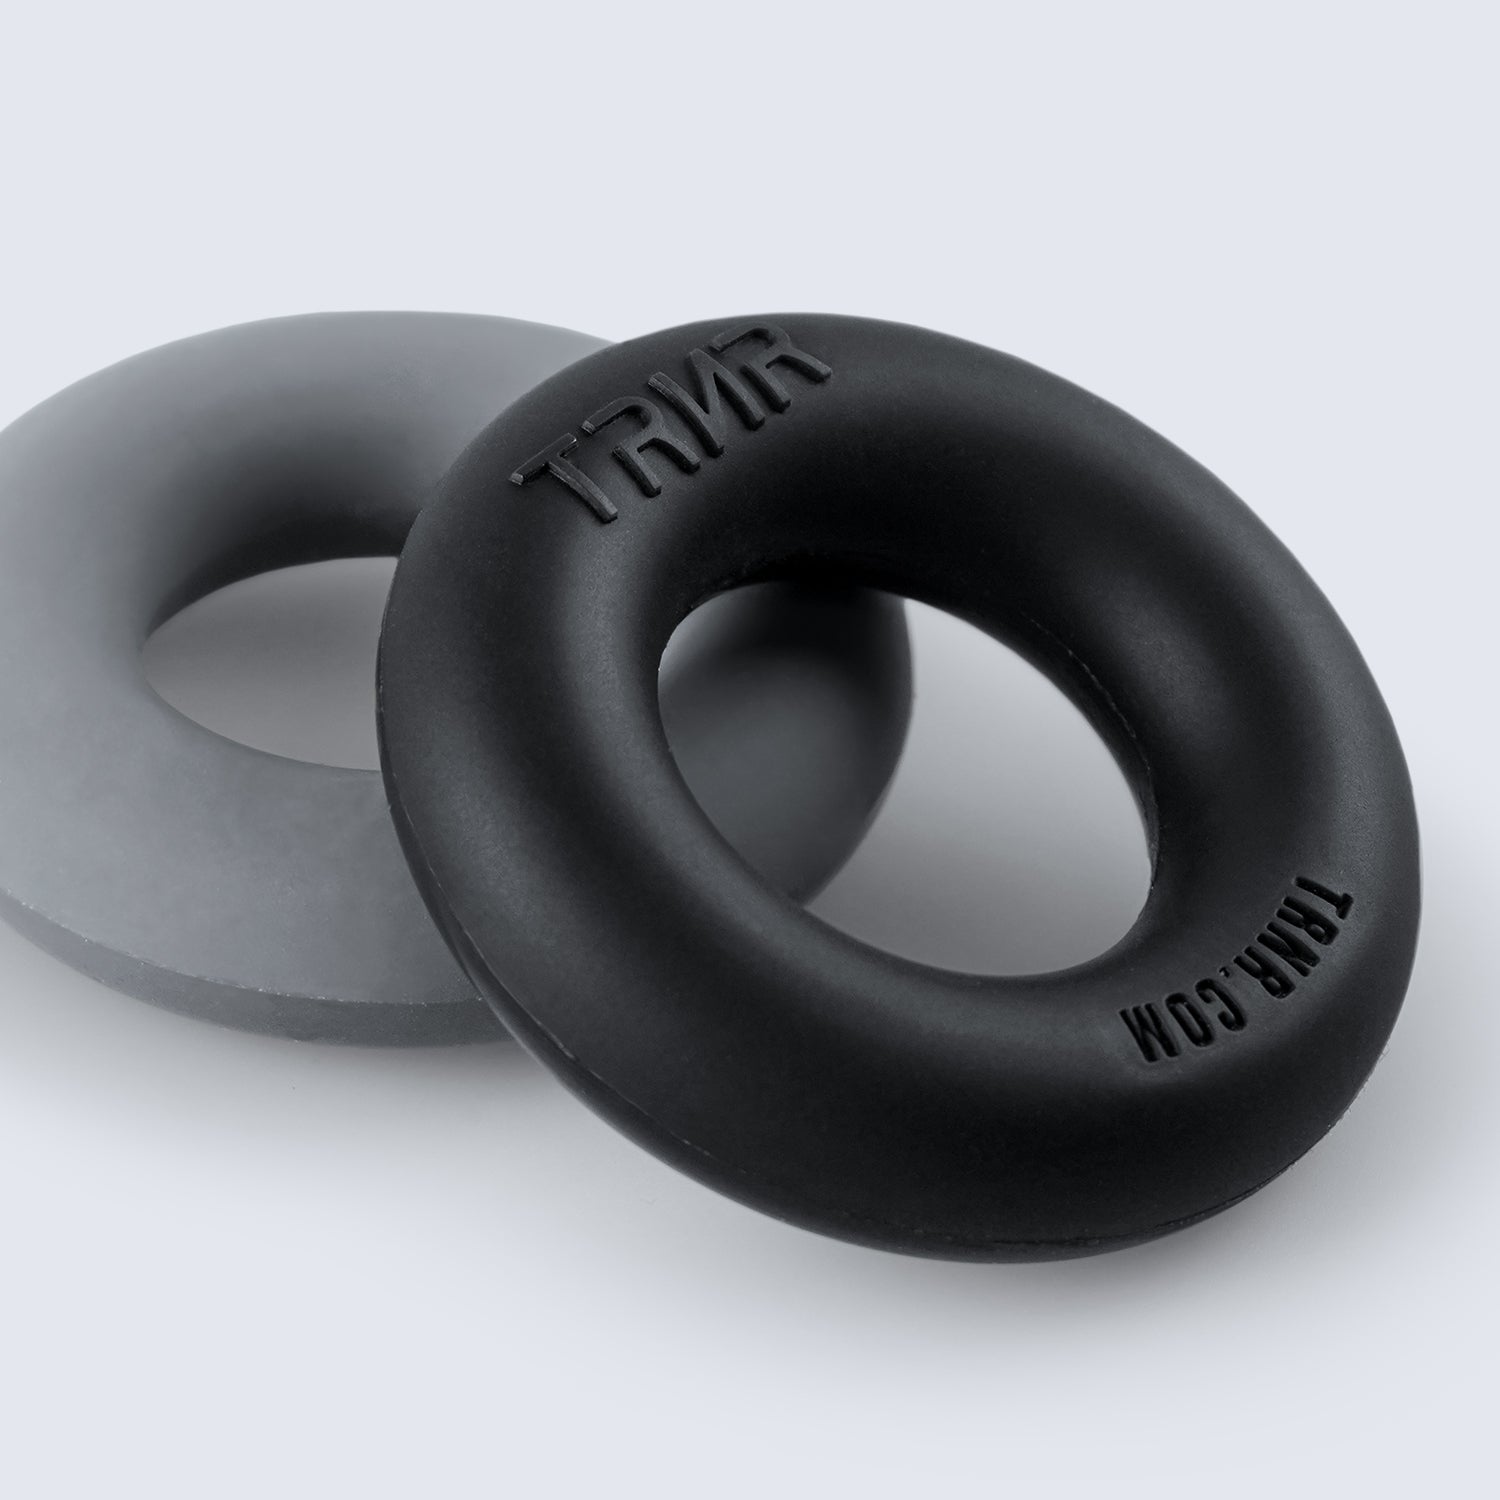 TRNR Hand Rings | Close-Up View | Premium Silicone Construction